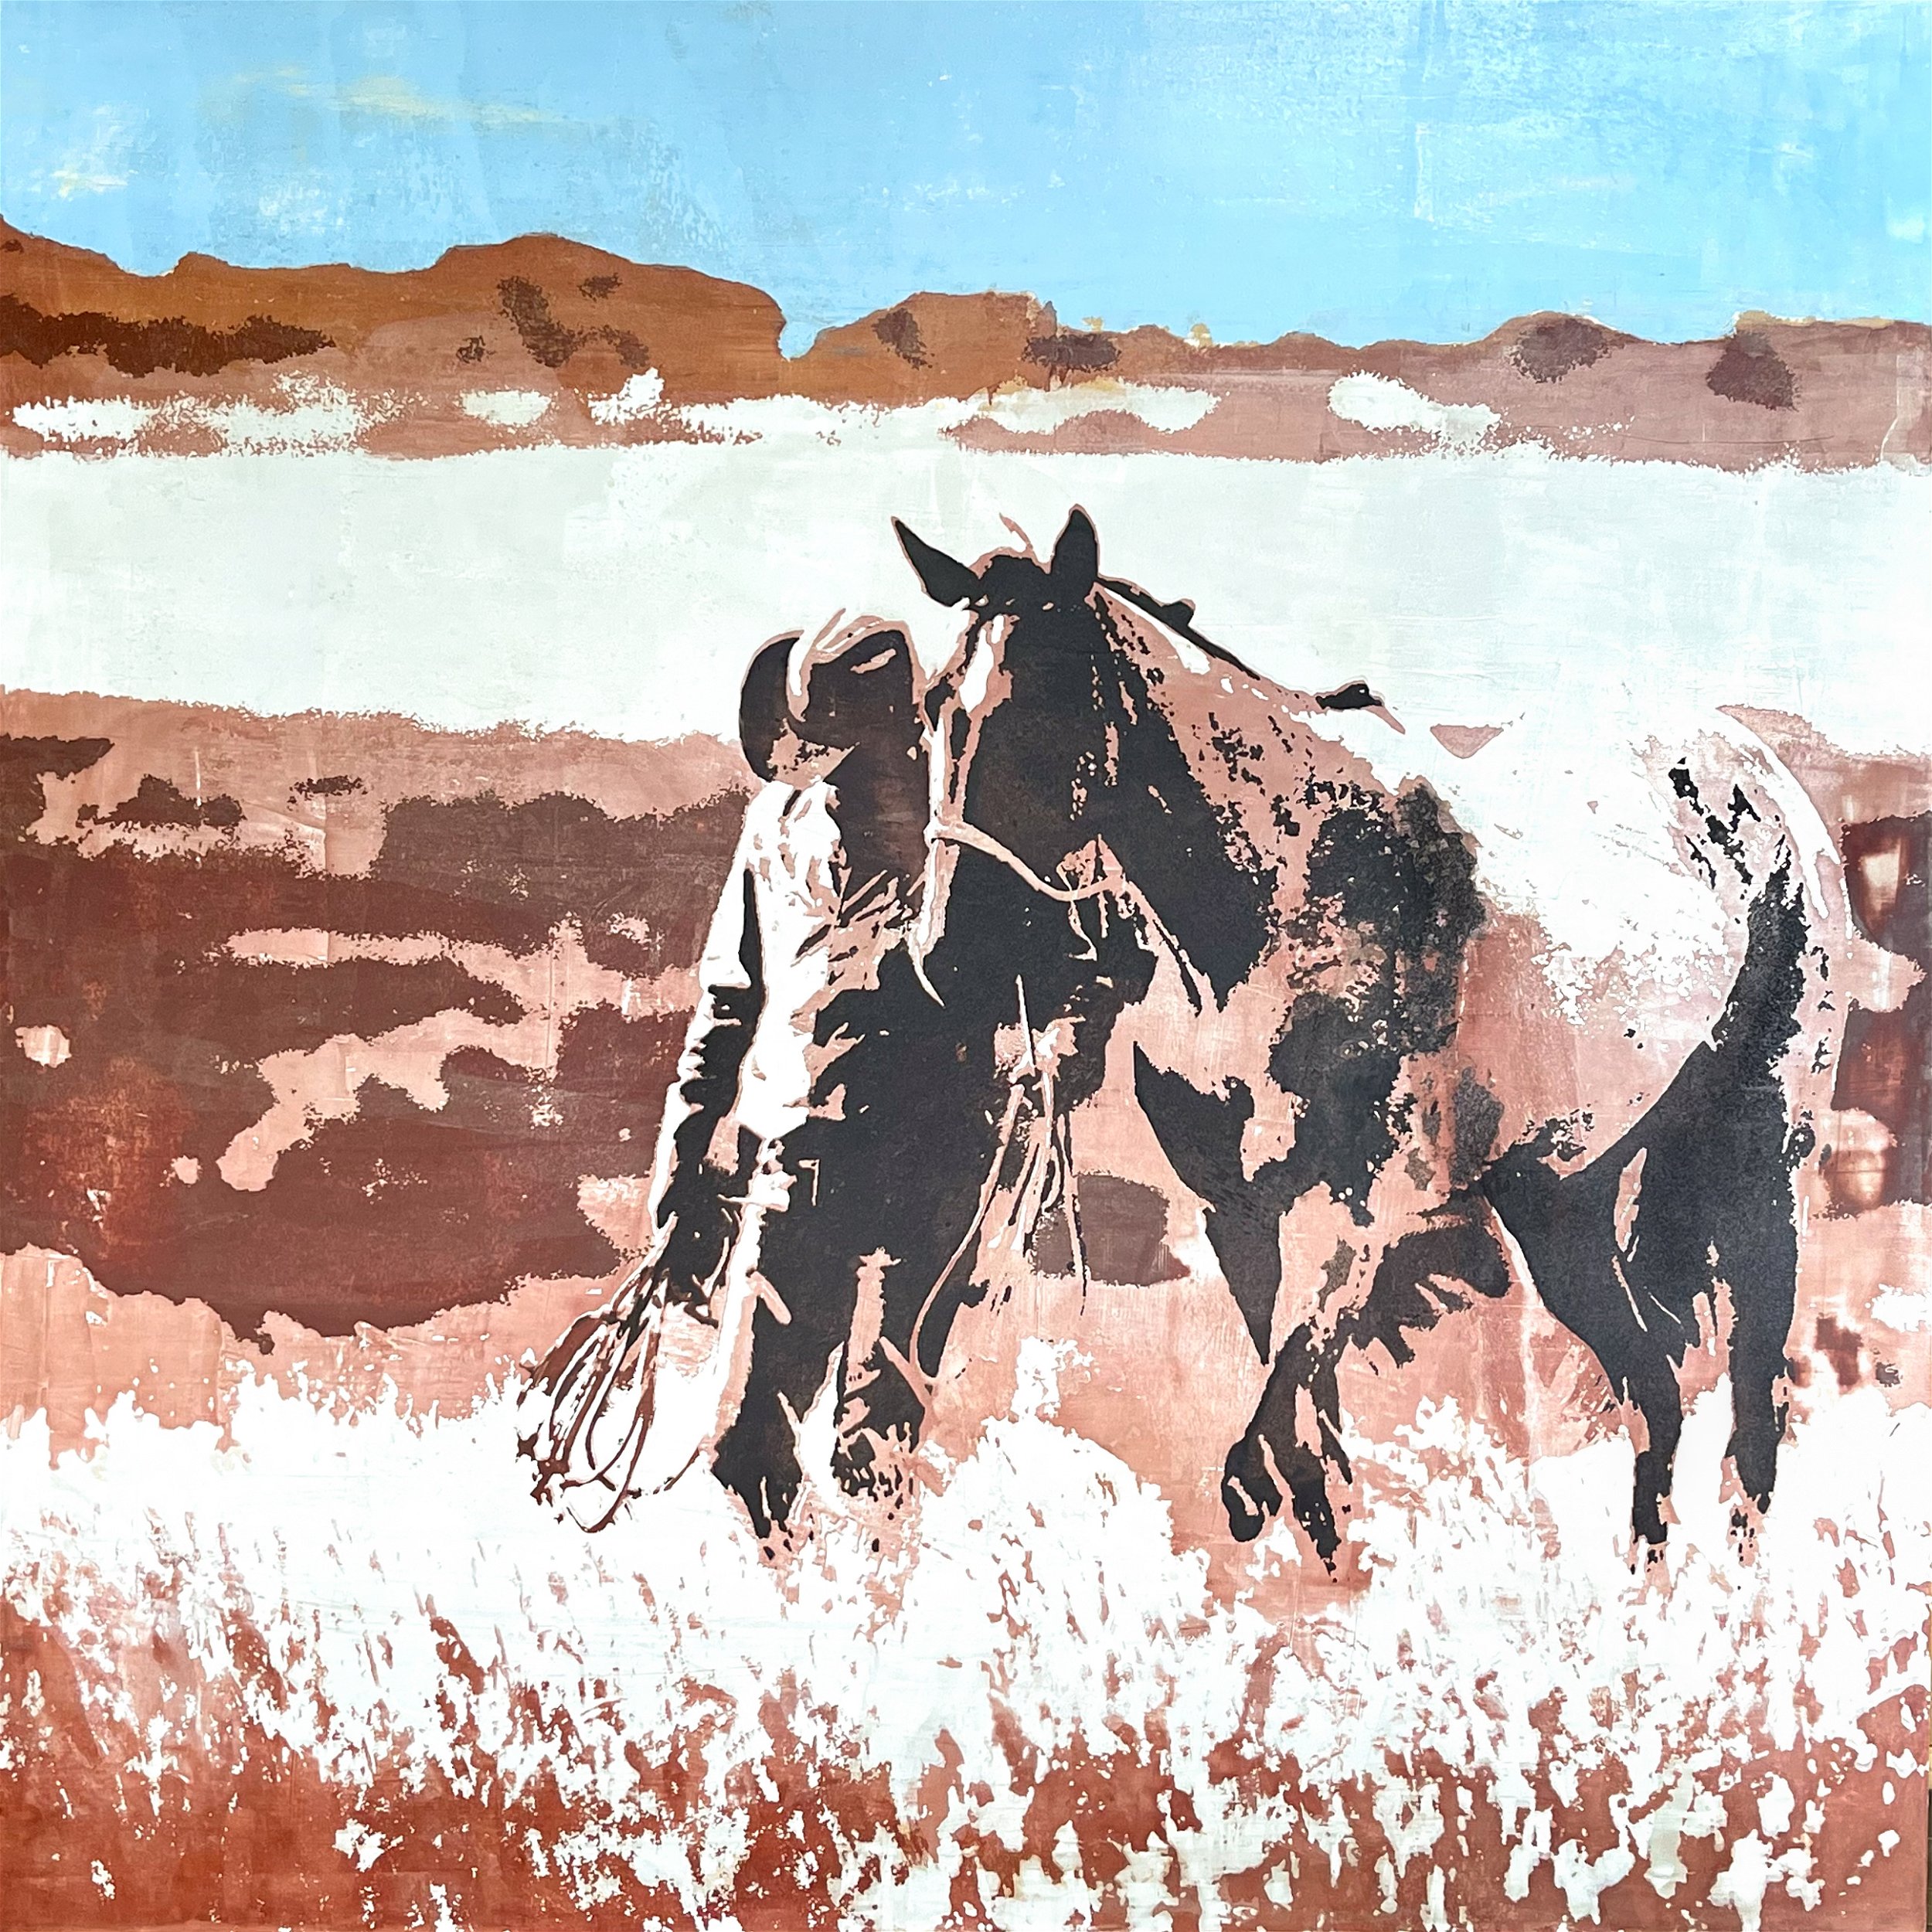 Maura Allen’s Visions of the American West